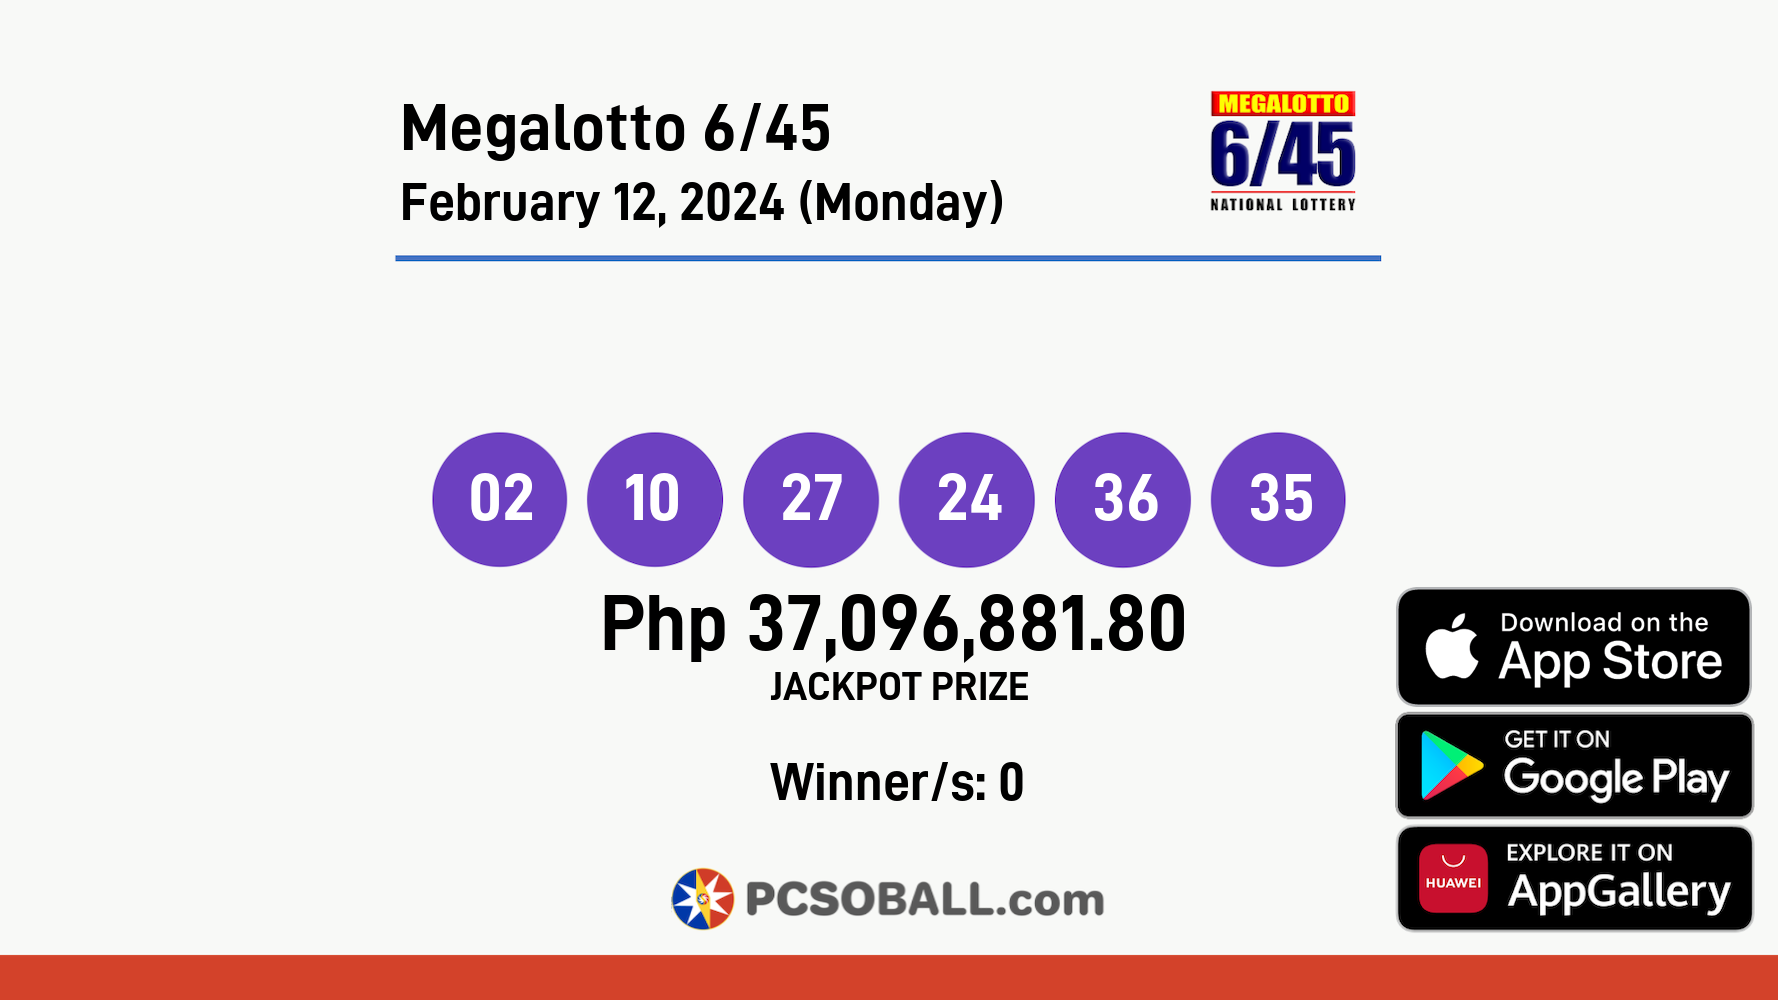 Megalotto 6/45 February 12, 2024 (Monday) Result